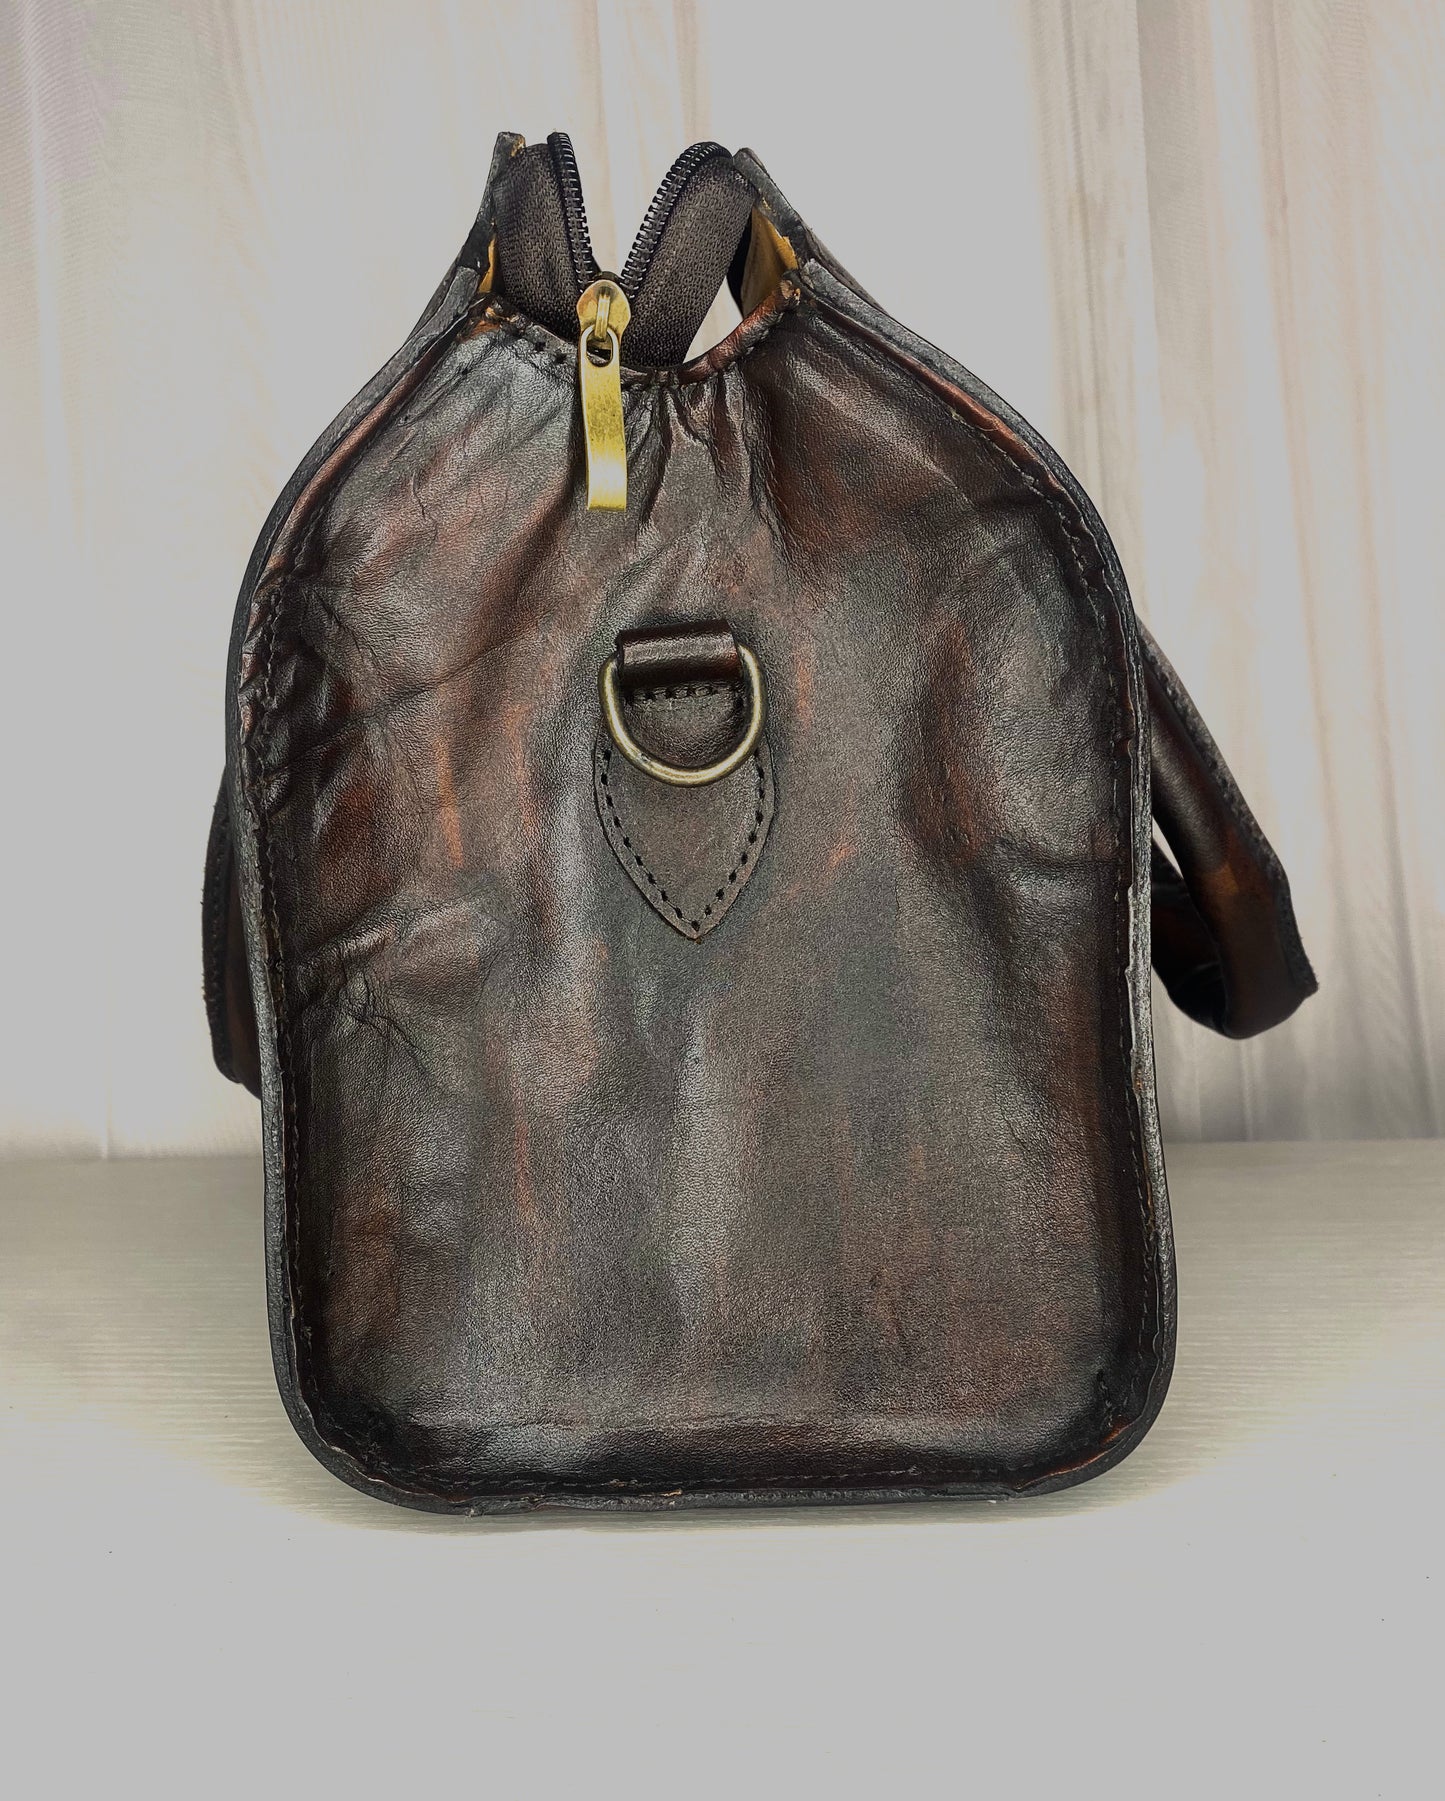 Medium sized bowling ball shaped authentic leather handbag. With strap to convert to crossbody, Mexican design etched throughout the bag, fully lined with suede. Side View in color vino